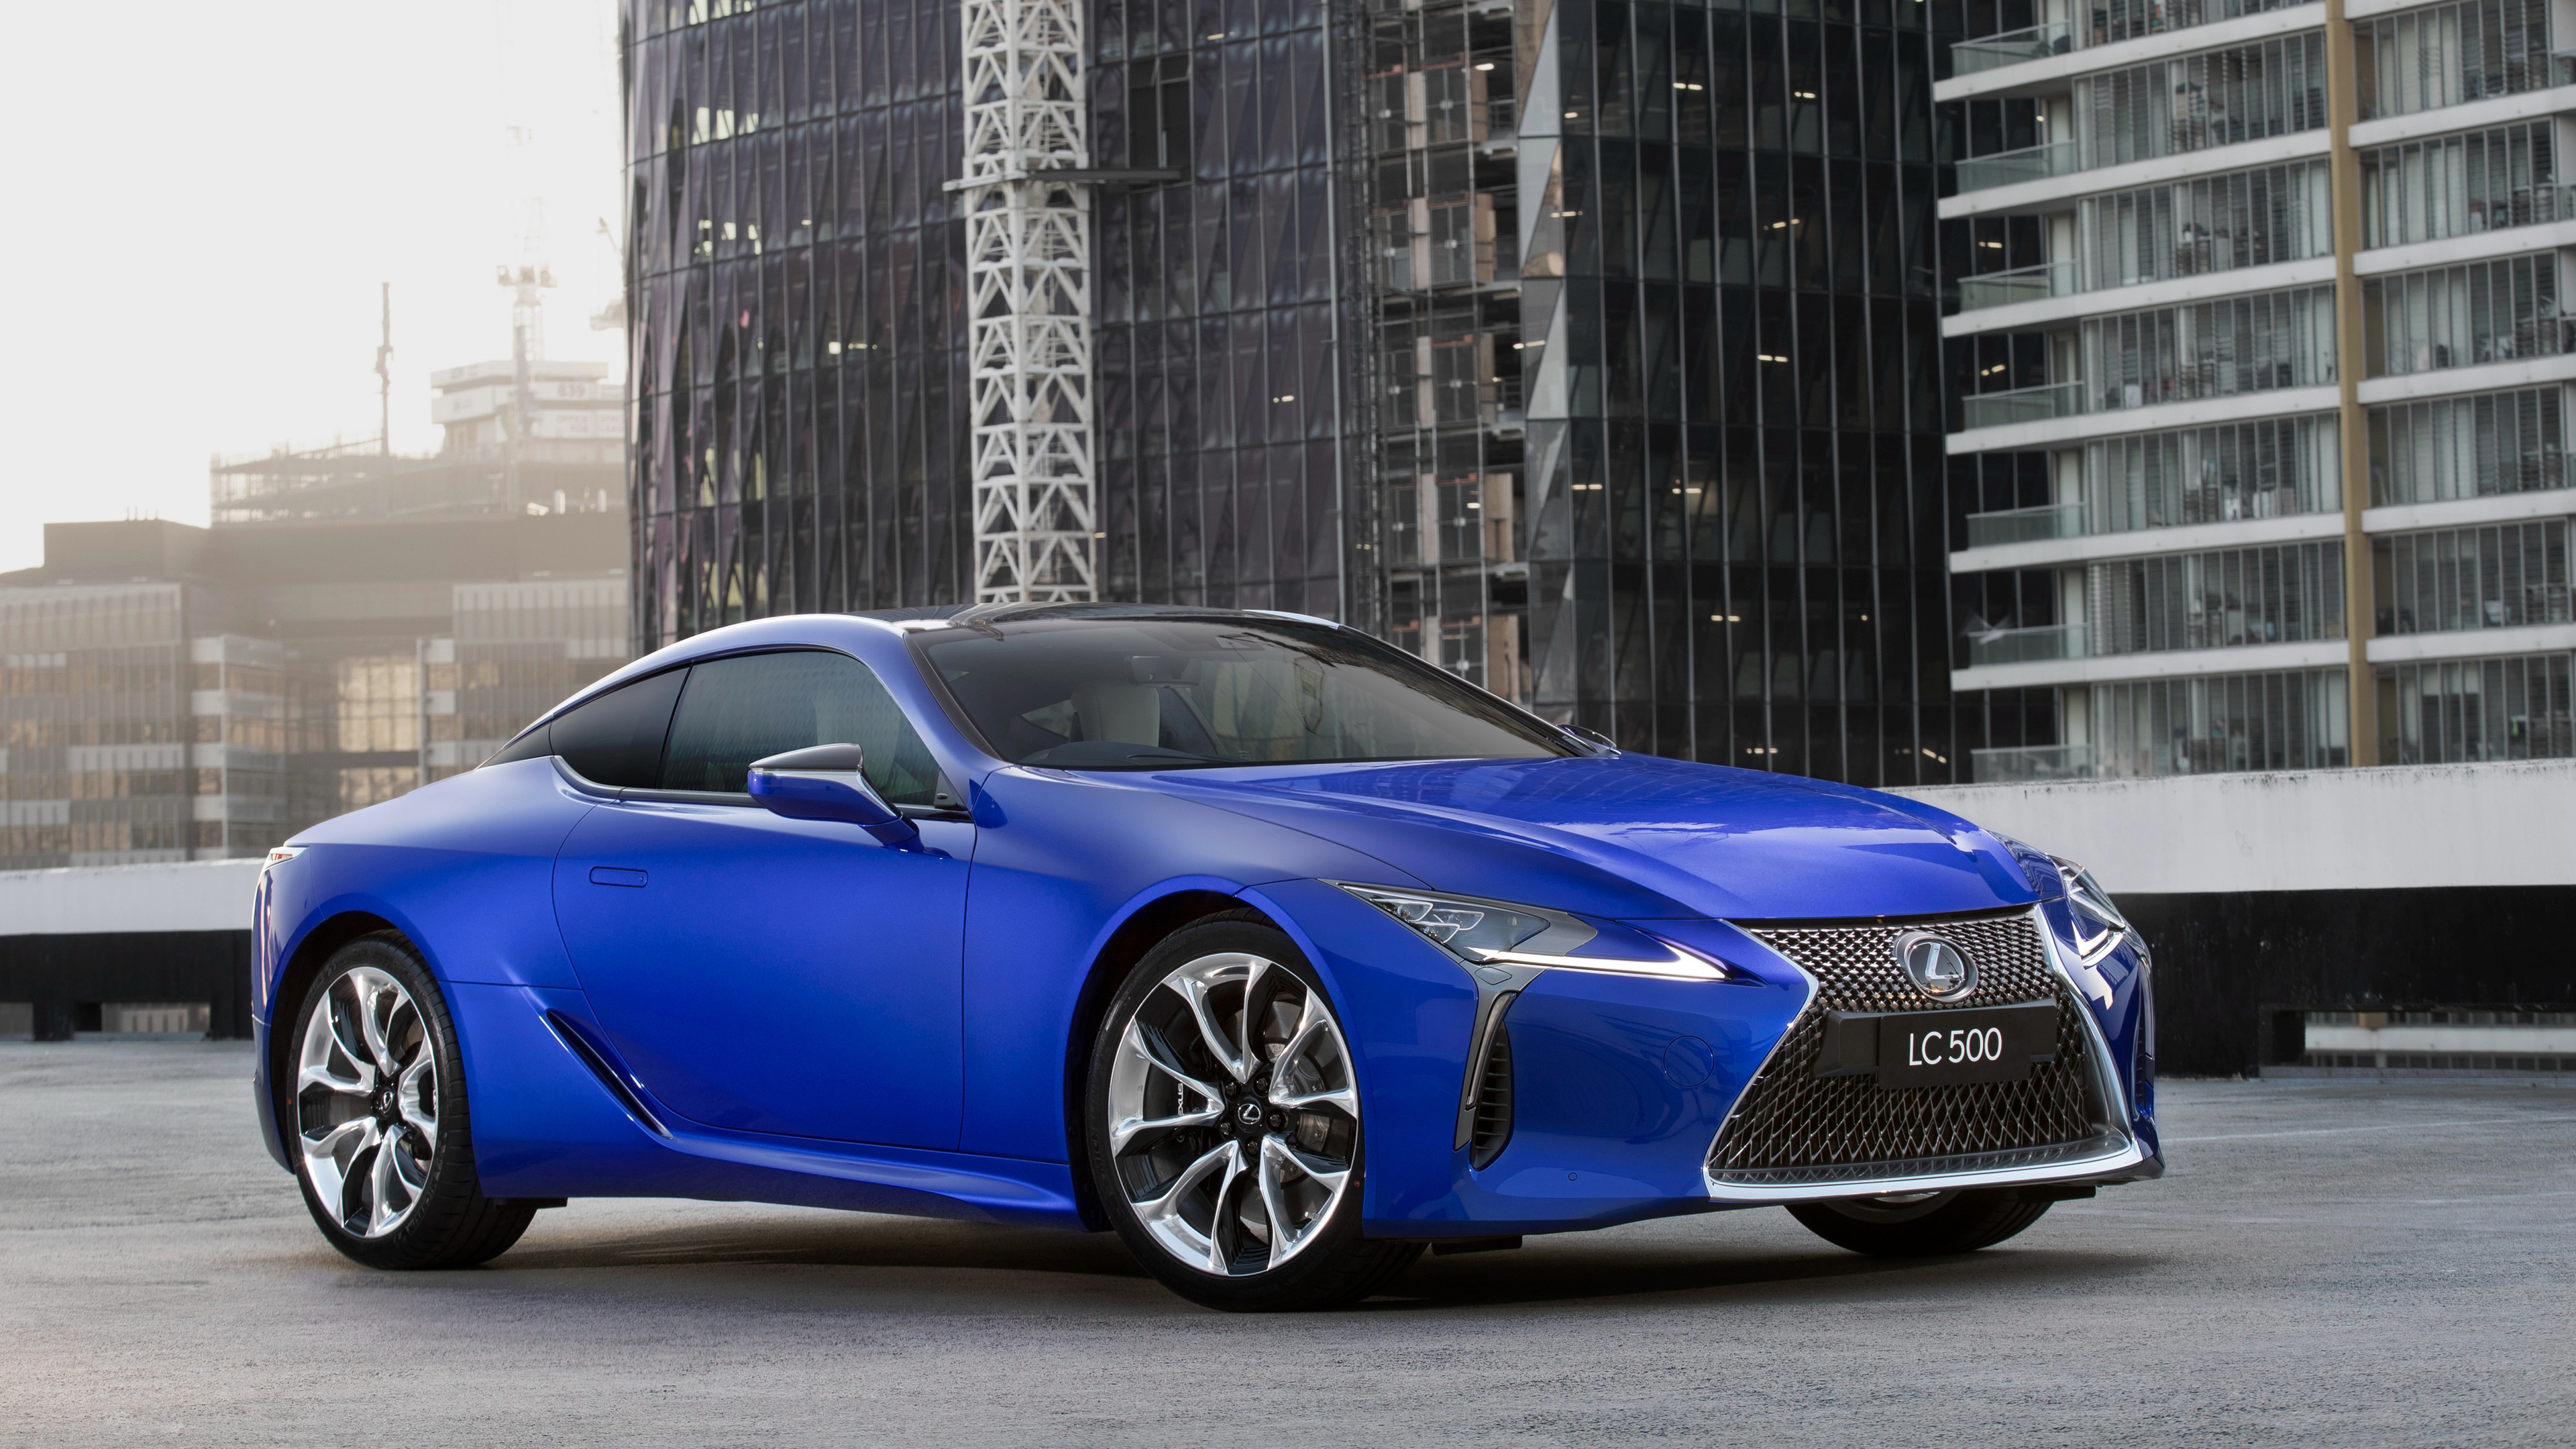 Lexus Lc 500 Limited Edition 2018 Front - 3840x2160 Wallpaper 